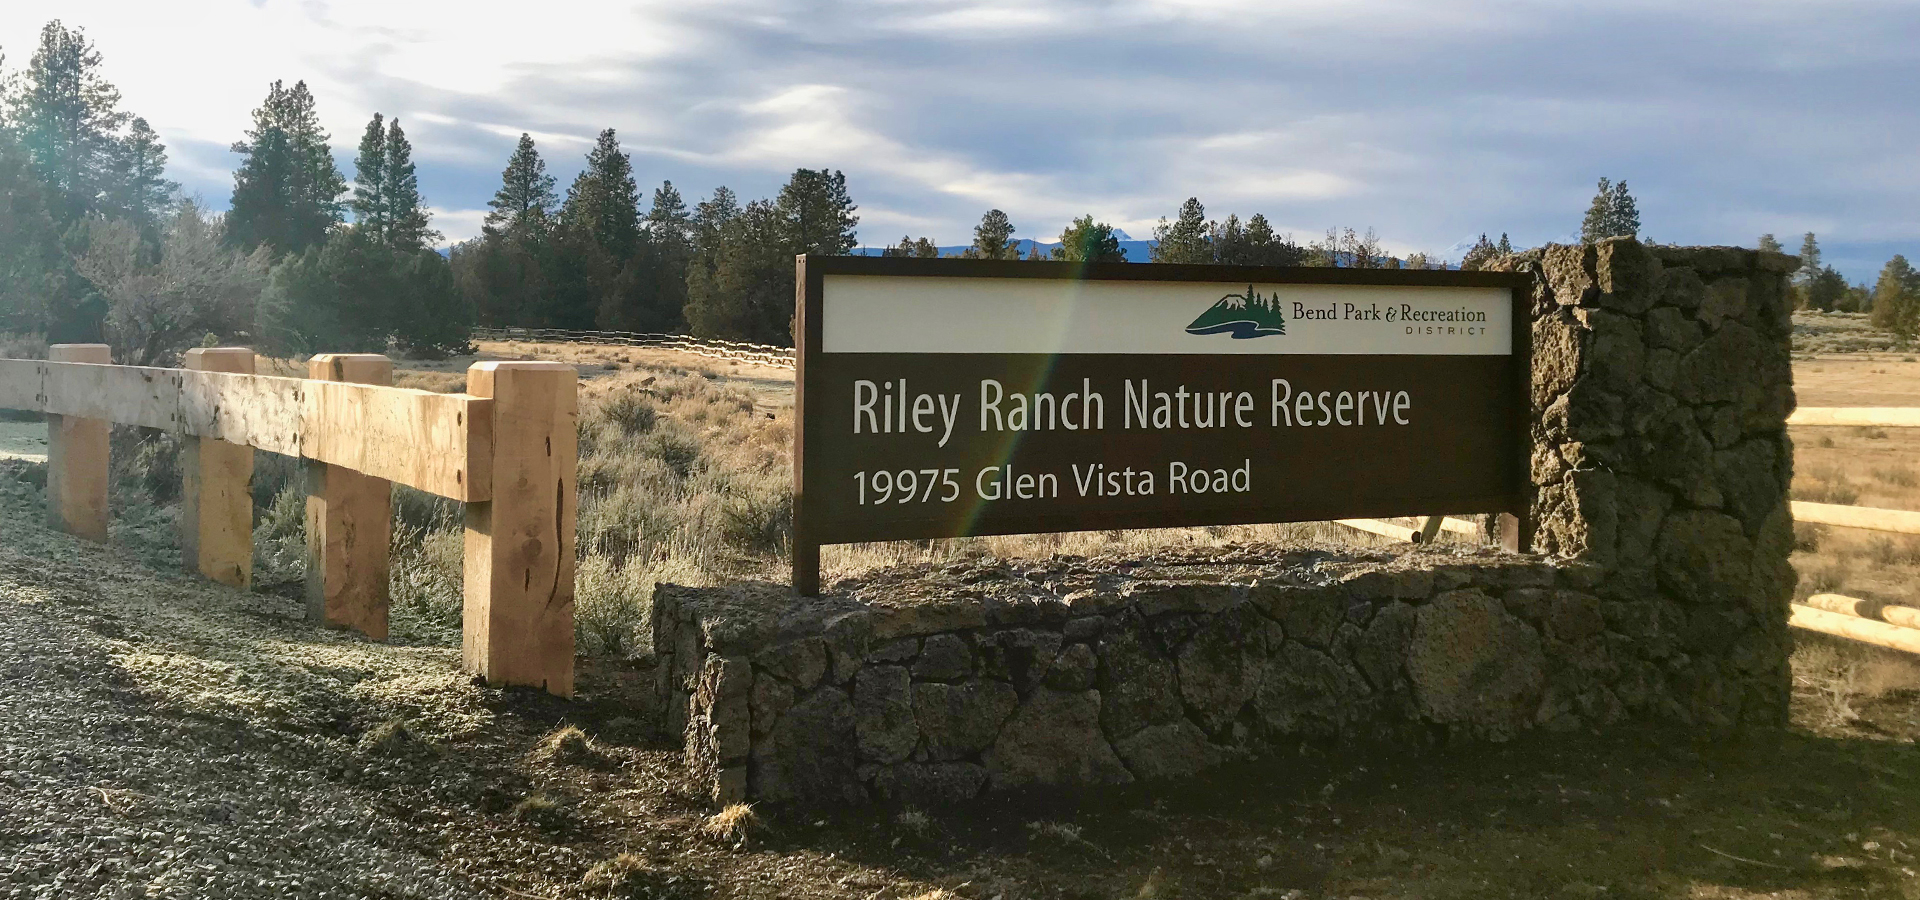 The sign at Riley Ranch Nature Reserve.